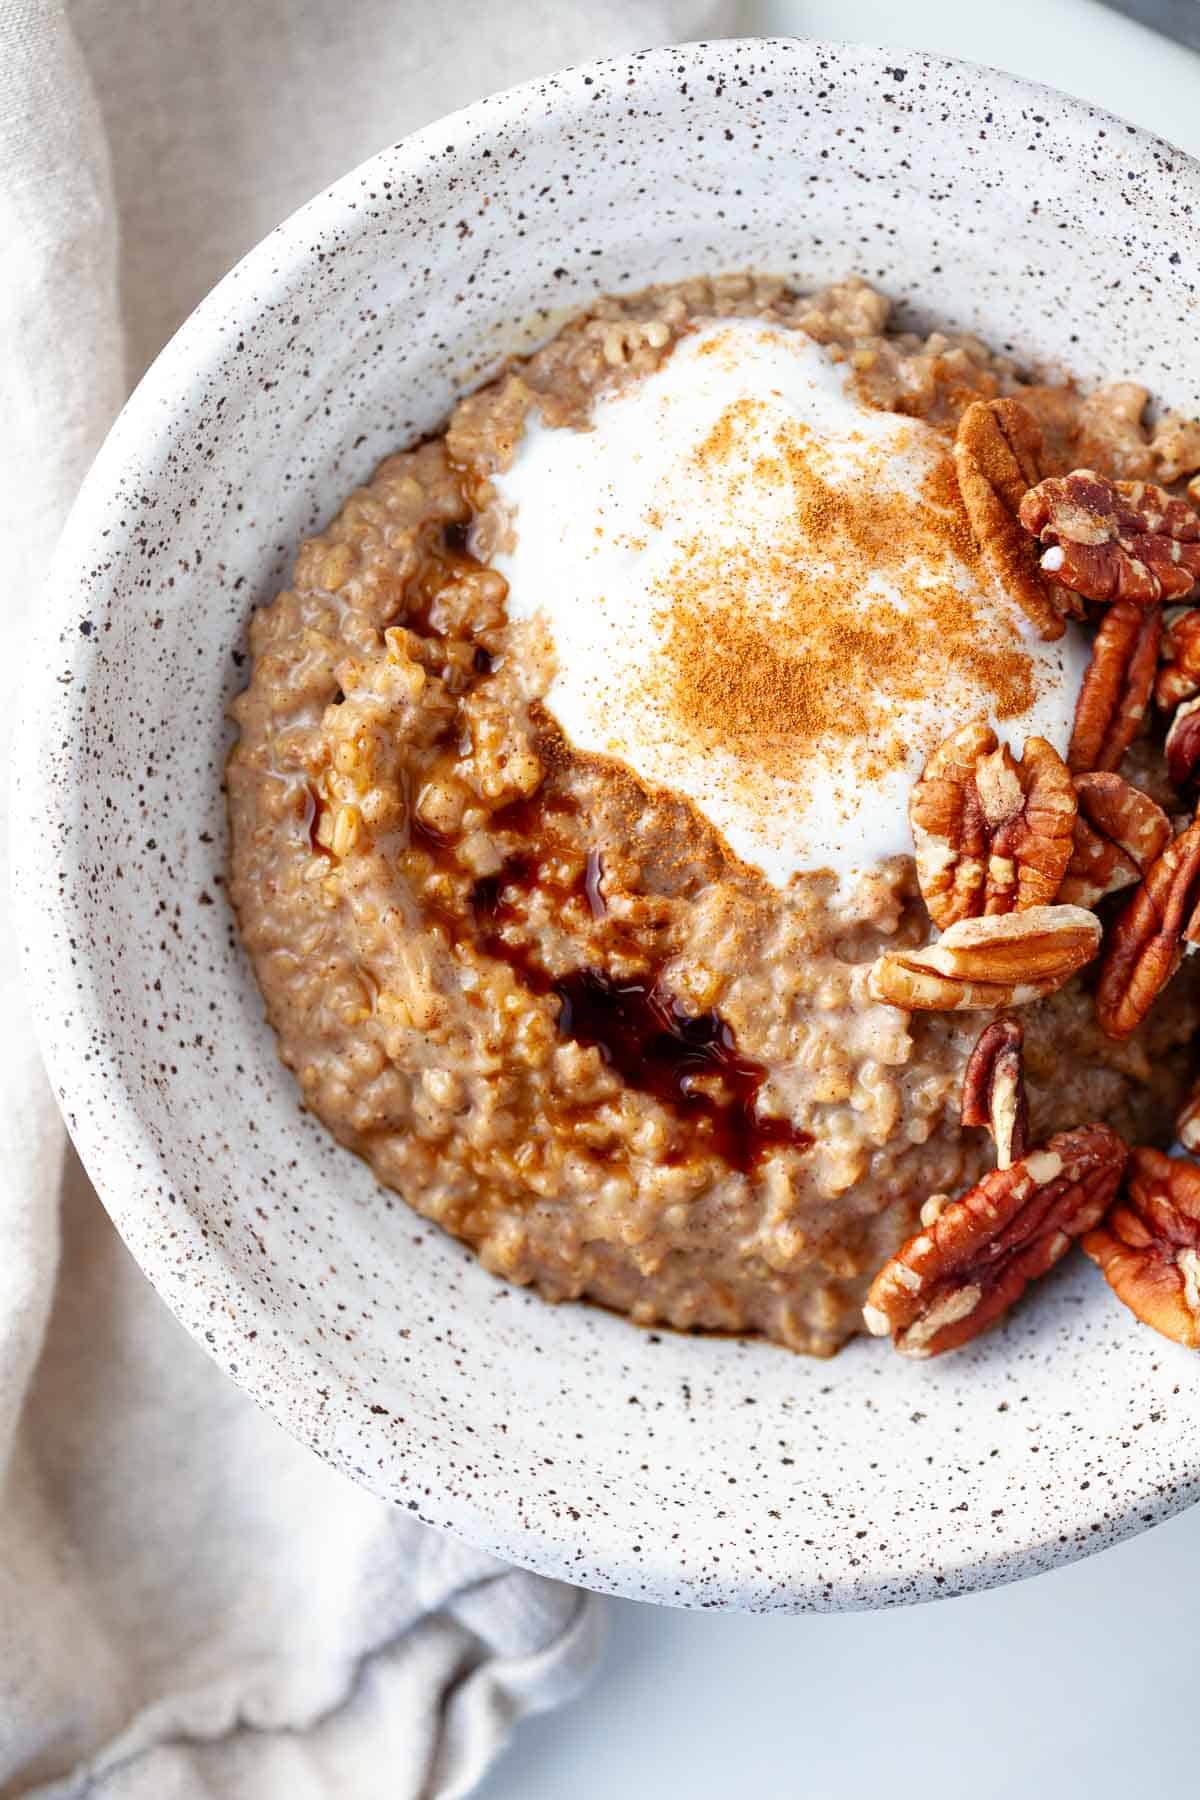 Gingerbread Oatmeal in a bowl speckled with yogurt, pecans, molasses and cinnamon.